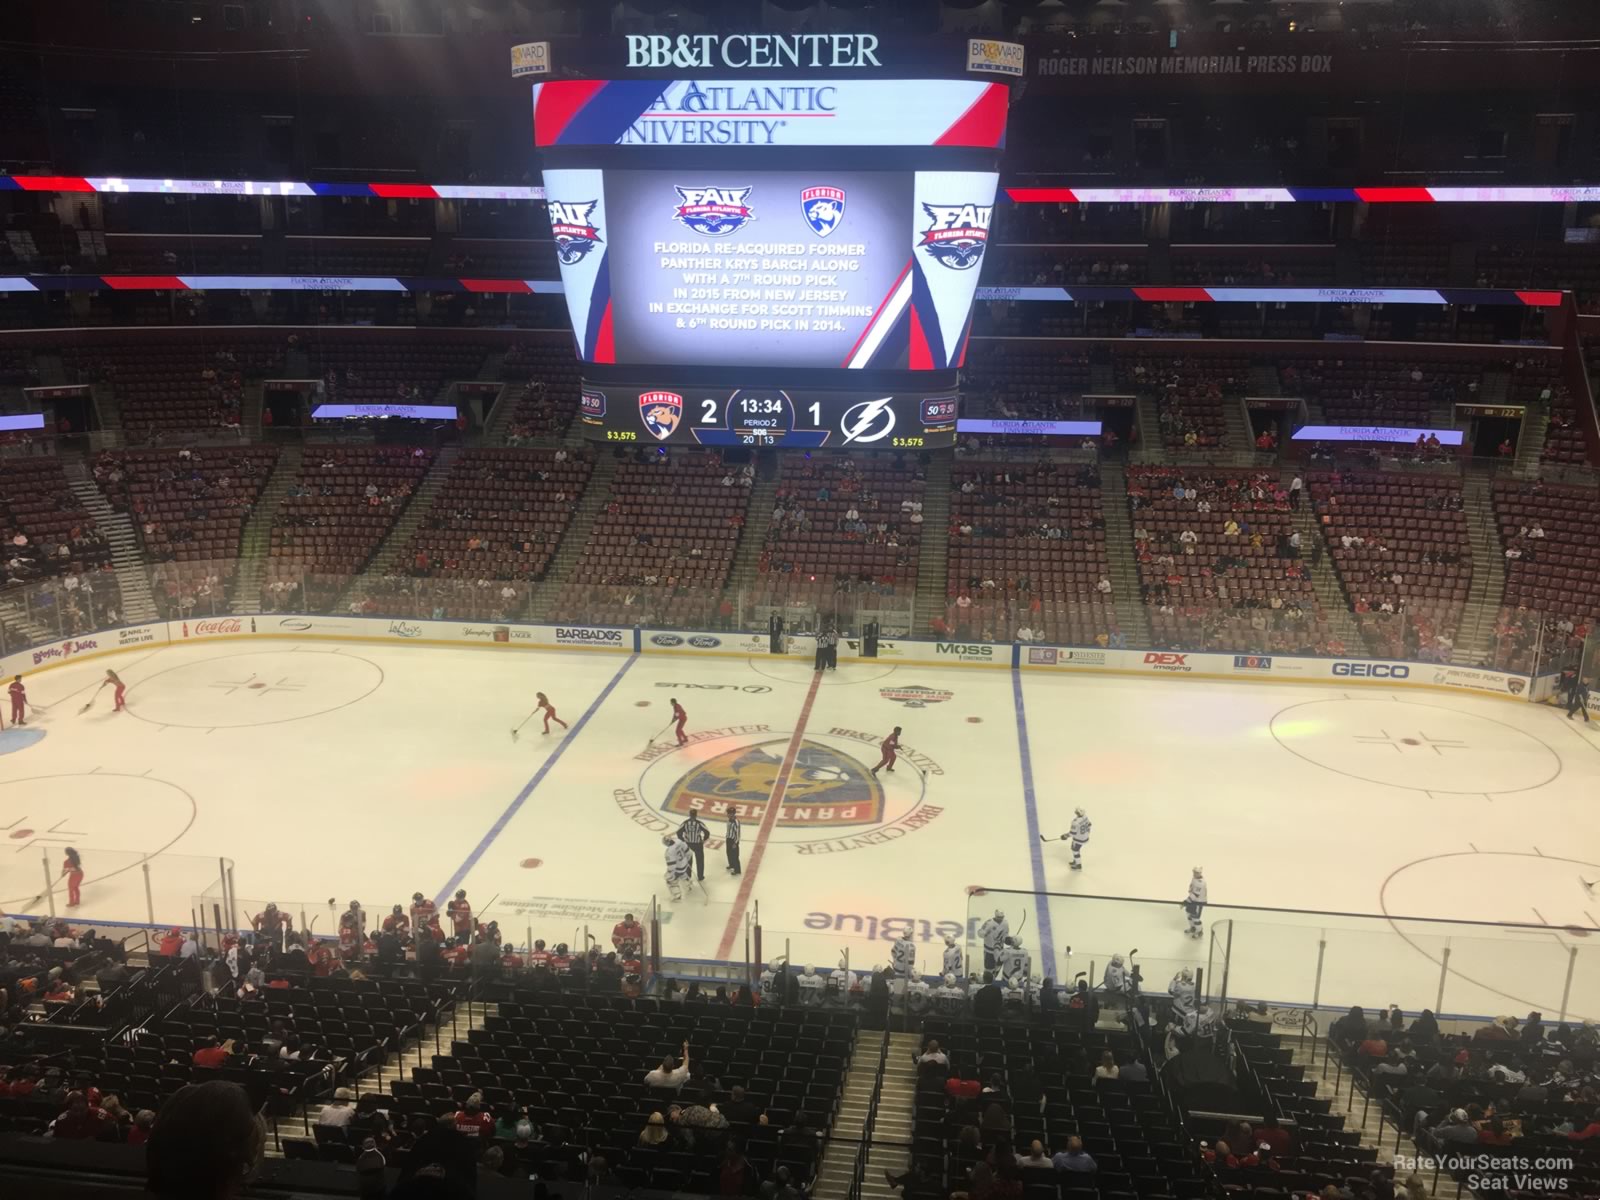 Seat View For Bb&t Center Club 1, Row - College Ice Hockey - HD Wallpaper 